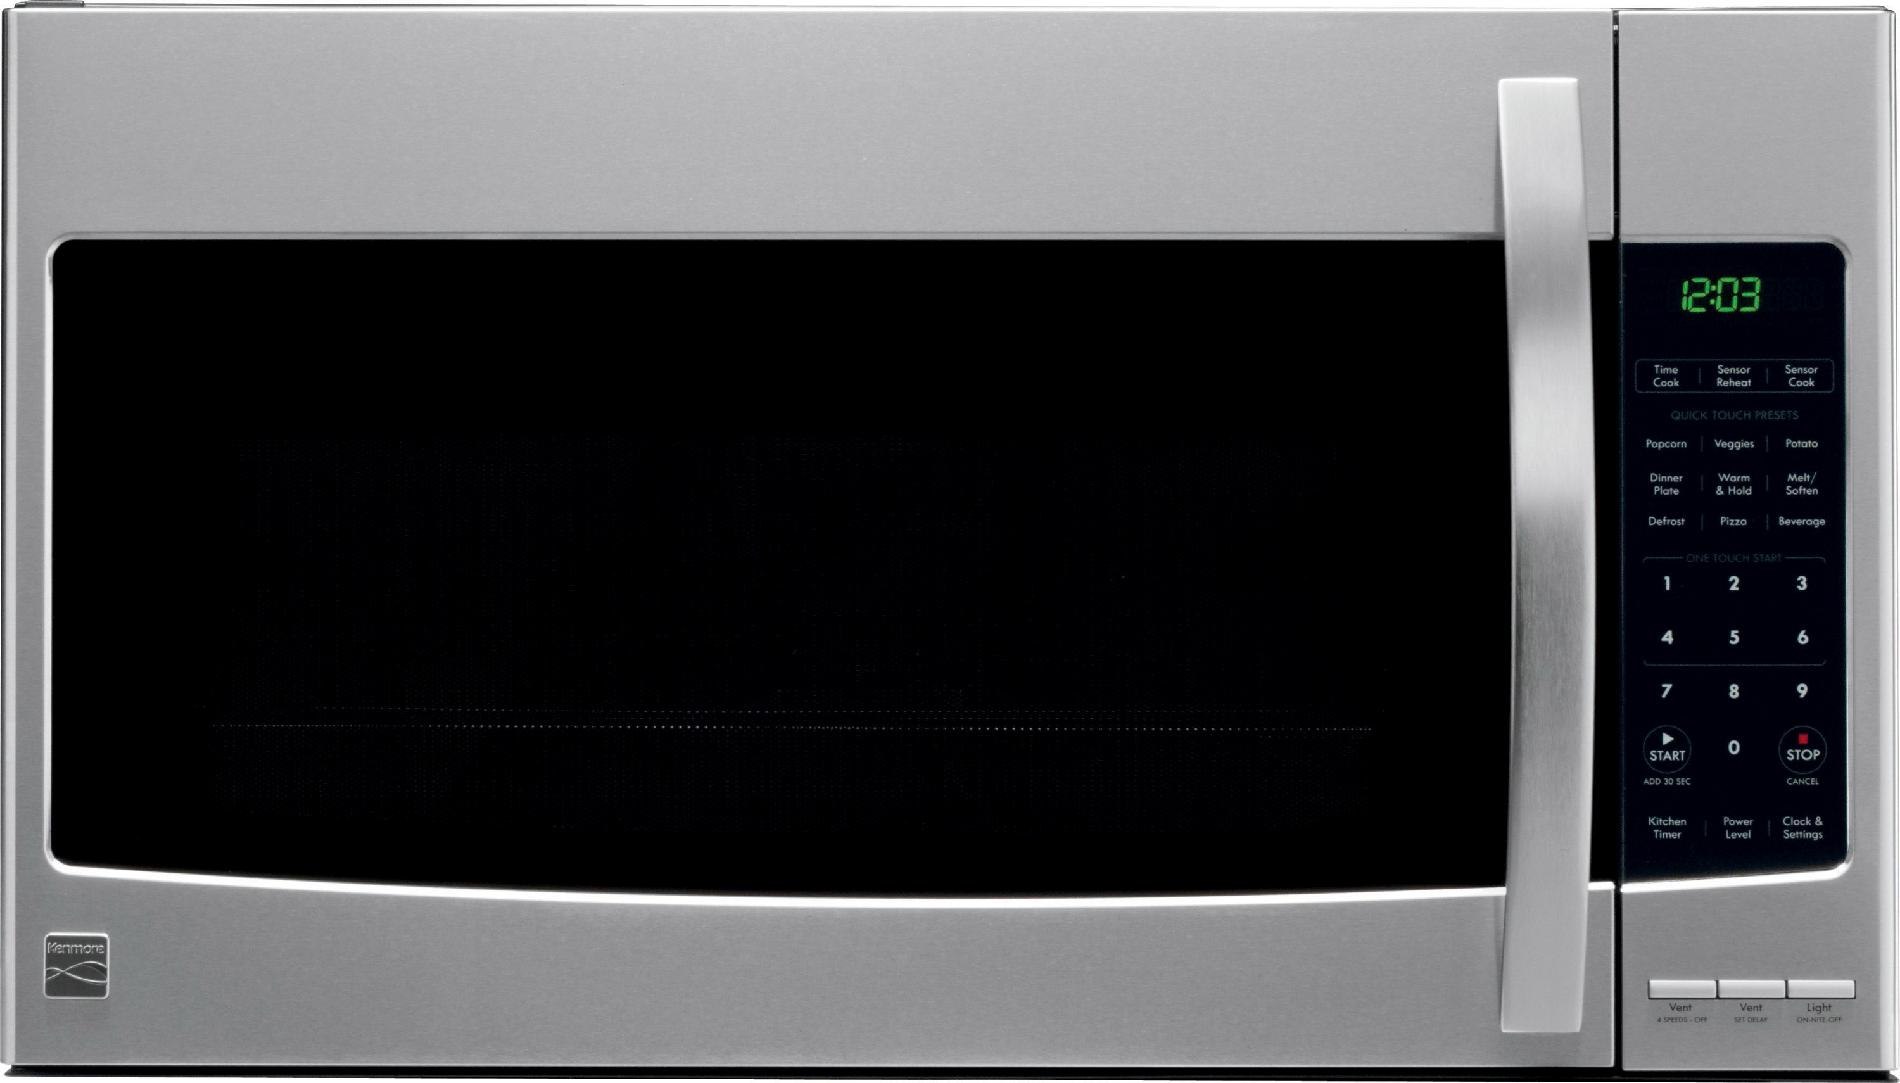 Kenmore - 80353 - 2.1 cu. ft. Over-the-Range Microwave - Stainless